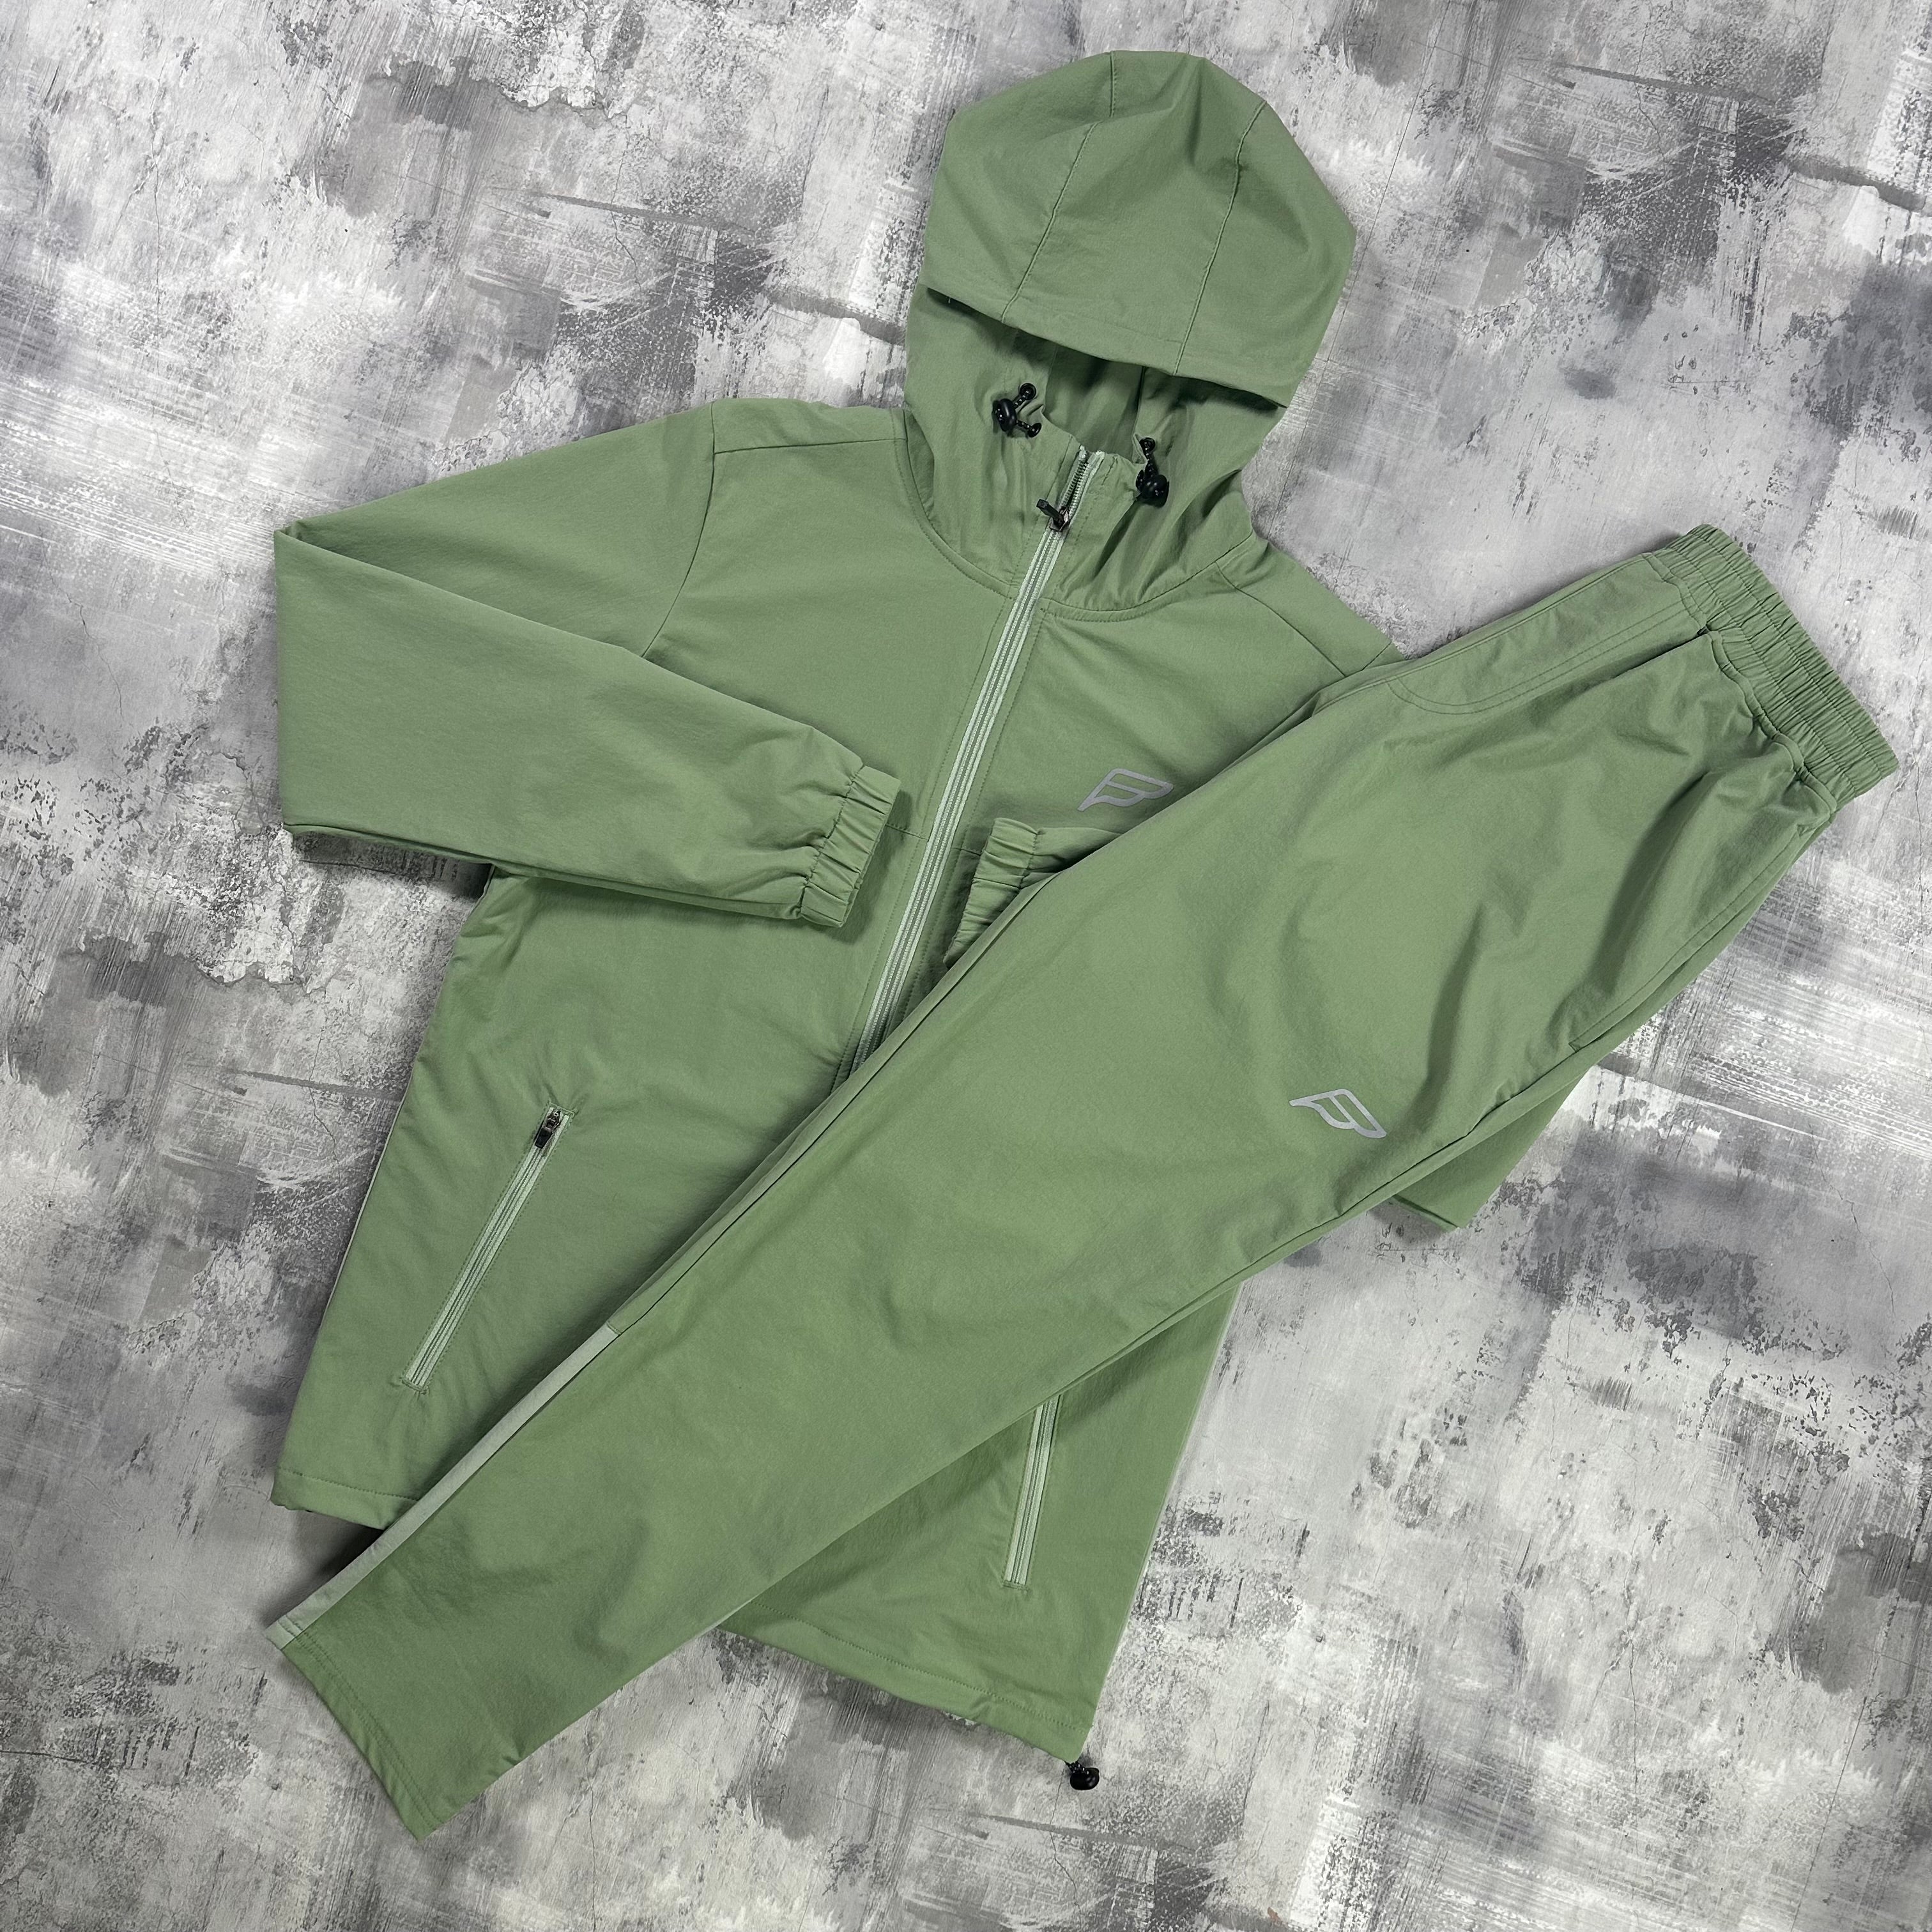 Frequency Thrive set Sage Green - Jacket & Trousers